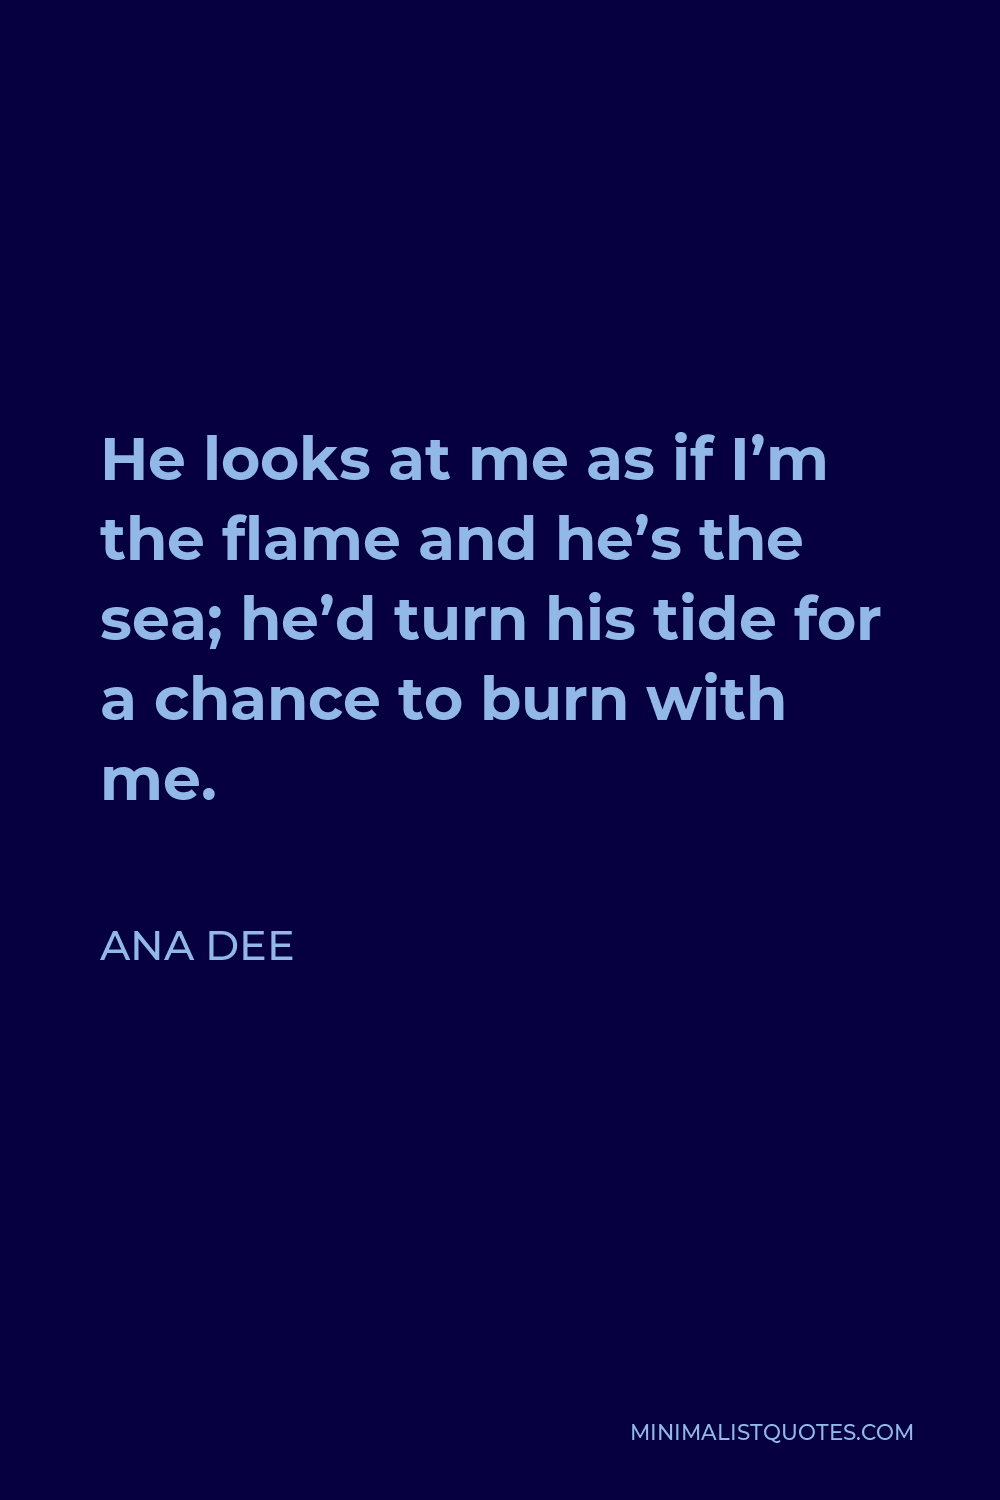 Ana Dee Quote - He looks at me as if I’m the flame and he’s the sea; he’d turn his tide for a chance to burn with me.